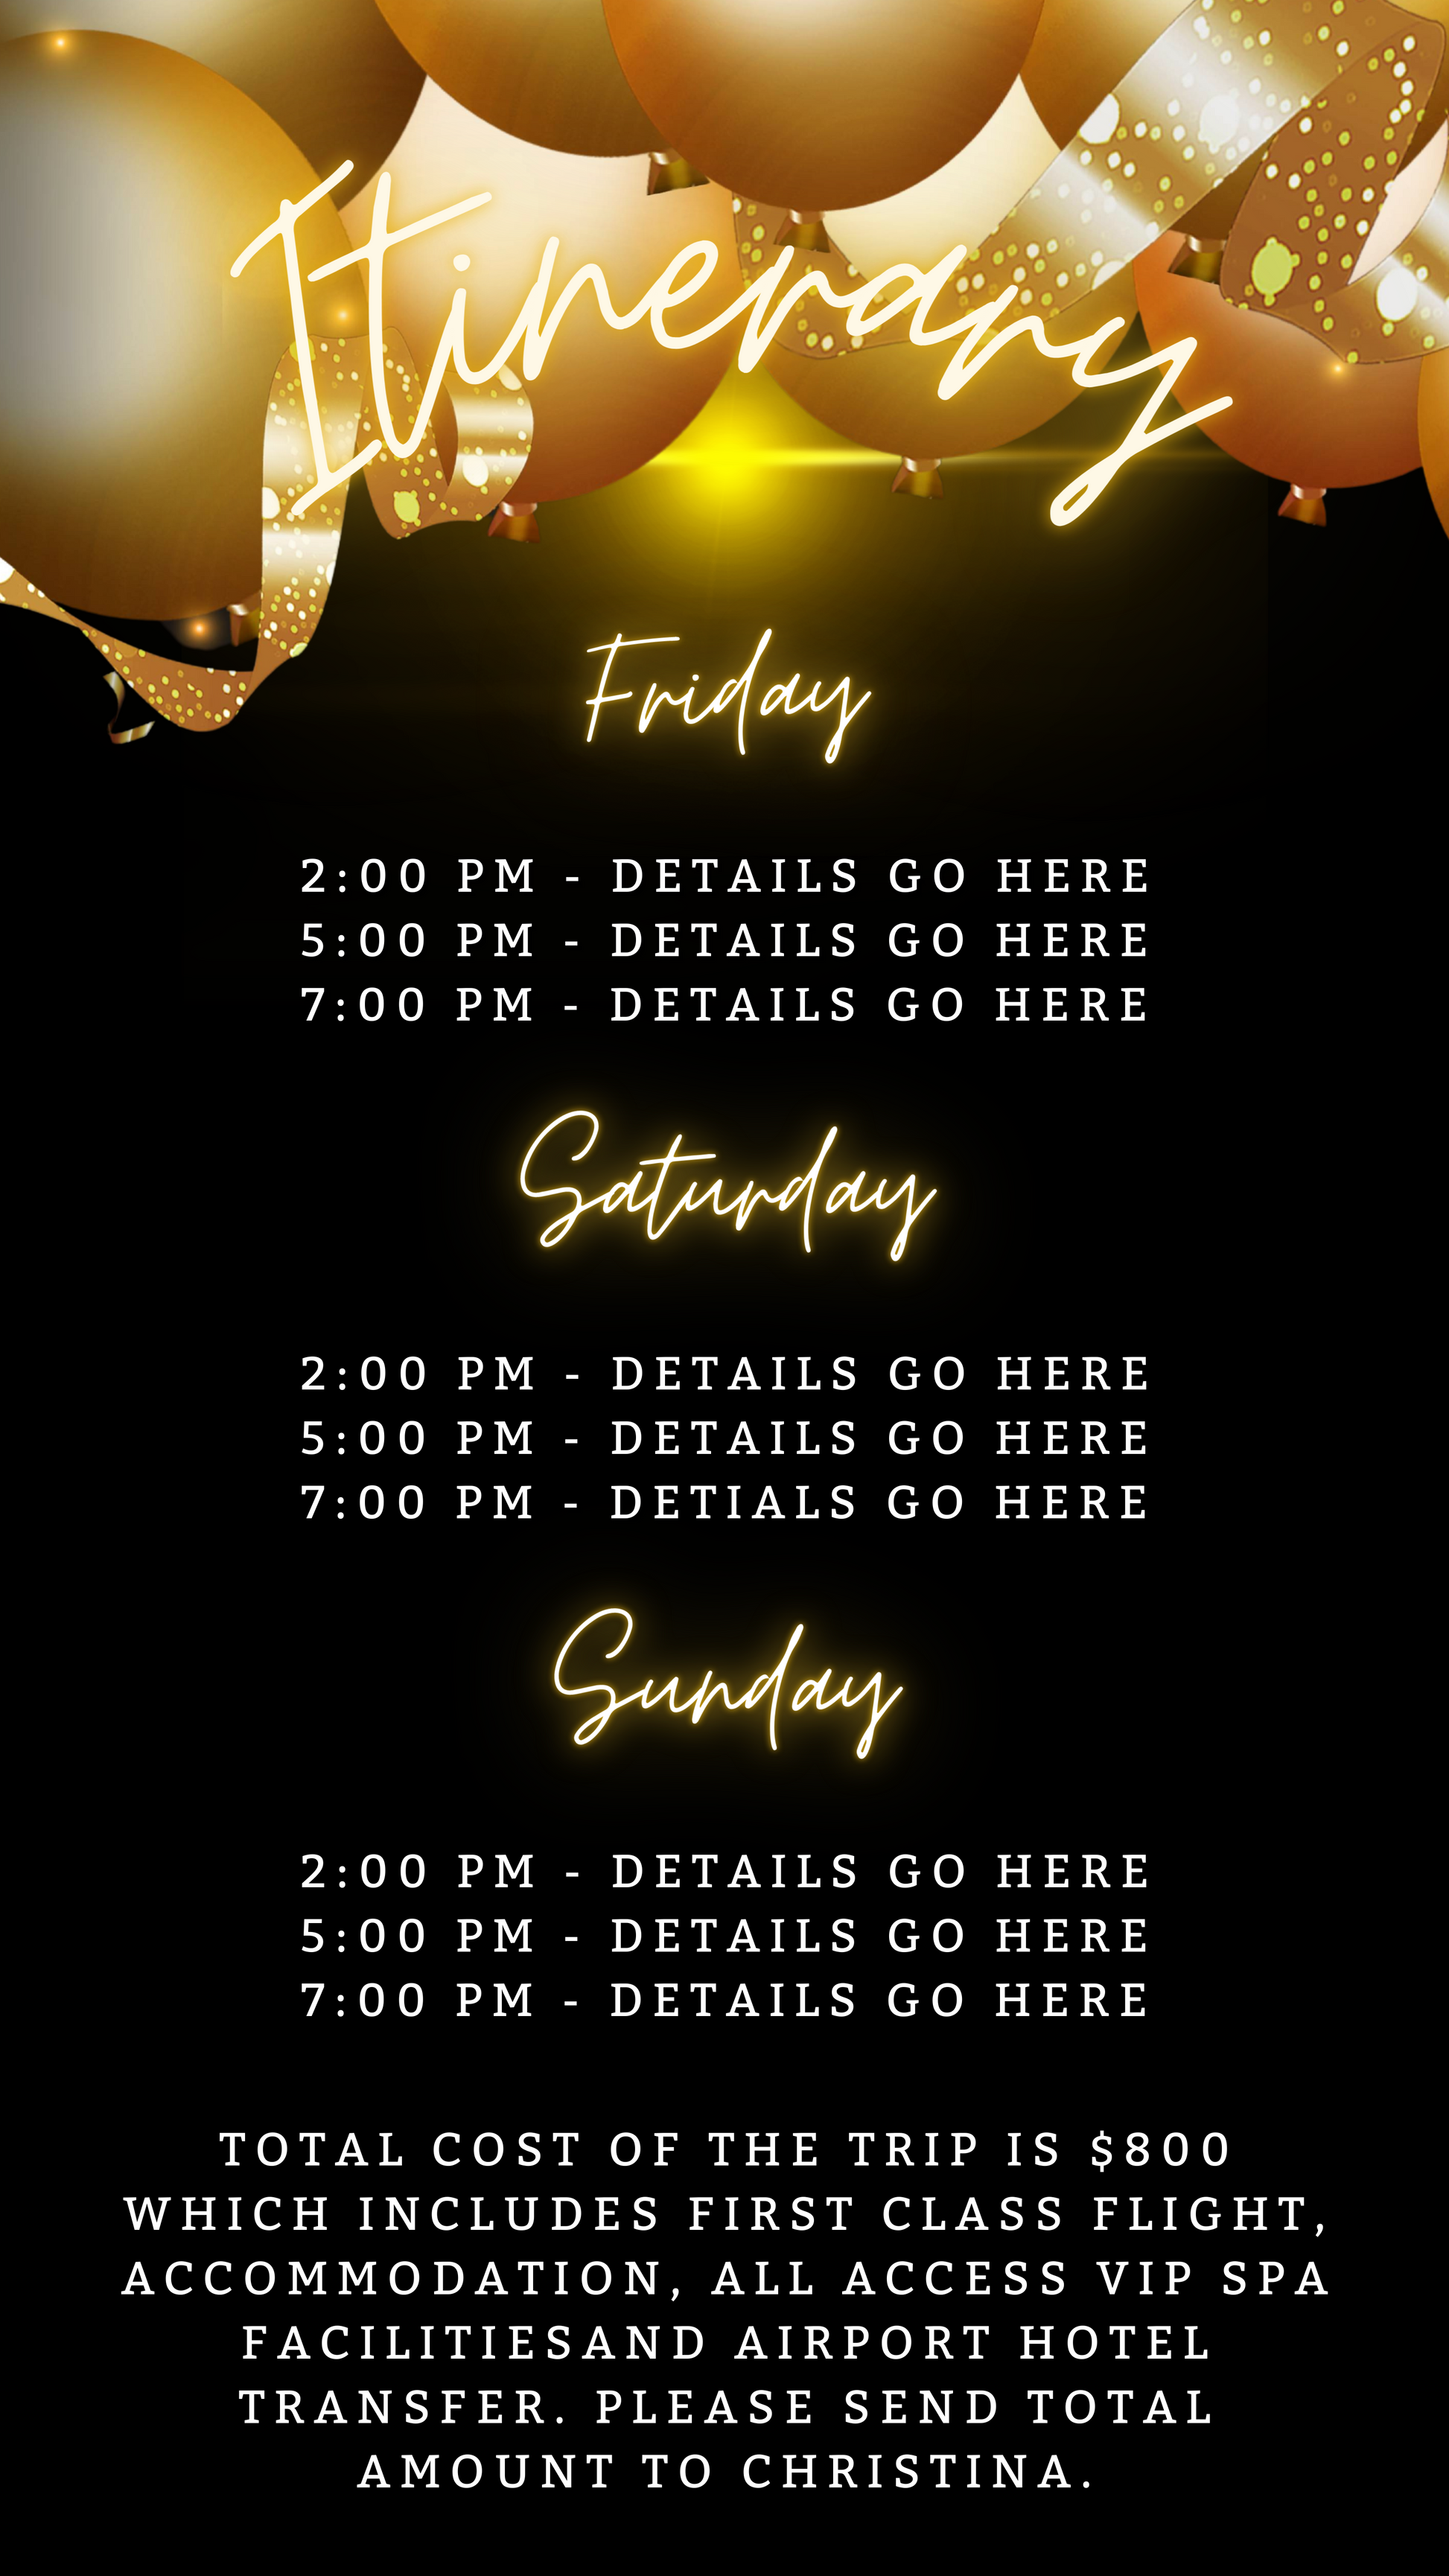 Black Neon Gold Floating Balloons | WTForty Weekend Evite, customizable digital poster with hat and text, instant download for event details via Canva.